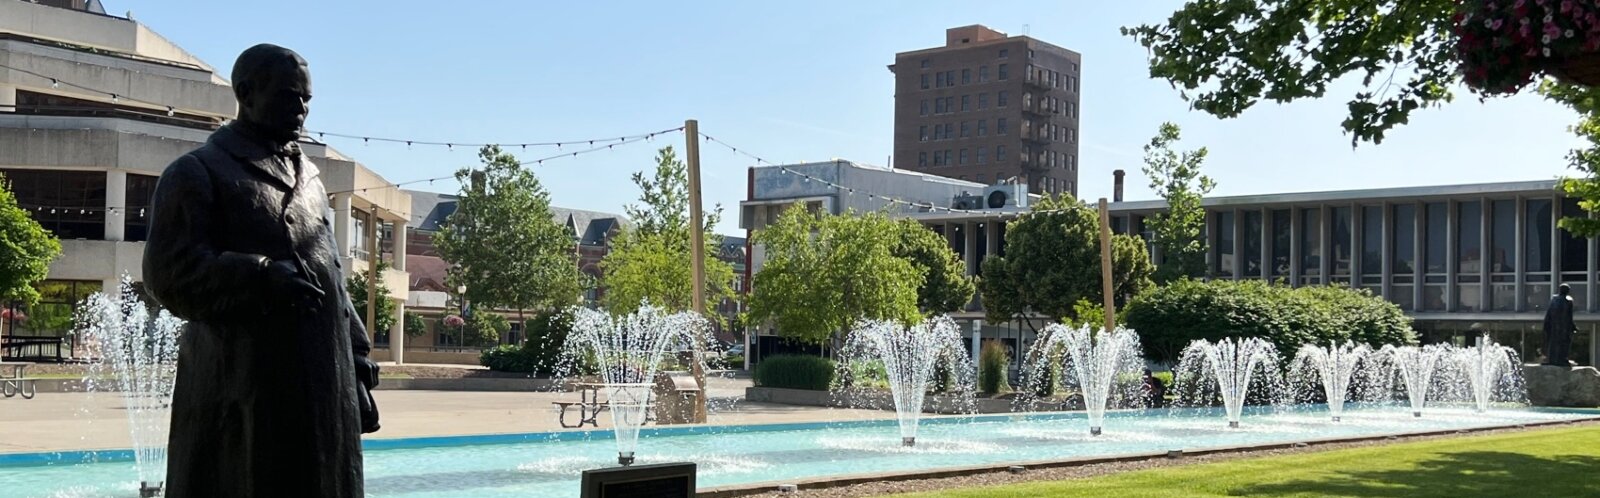 The City Hall Plaza fountains, near the Harry Toulmin Sr. statue look welcoming on hot summer days.